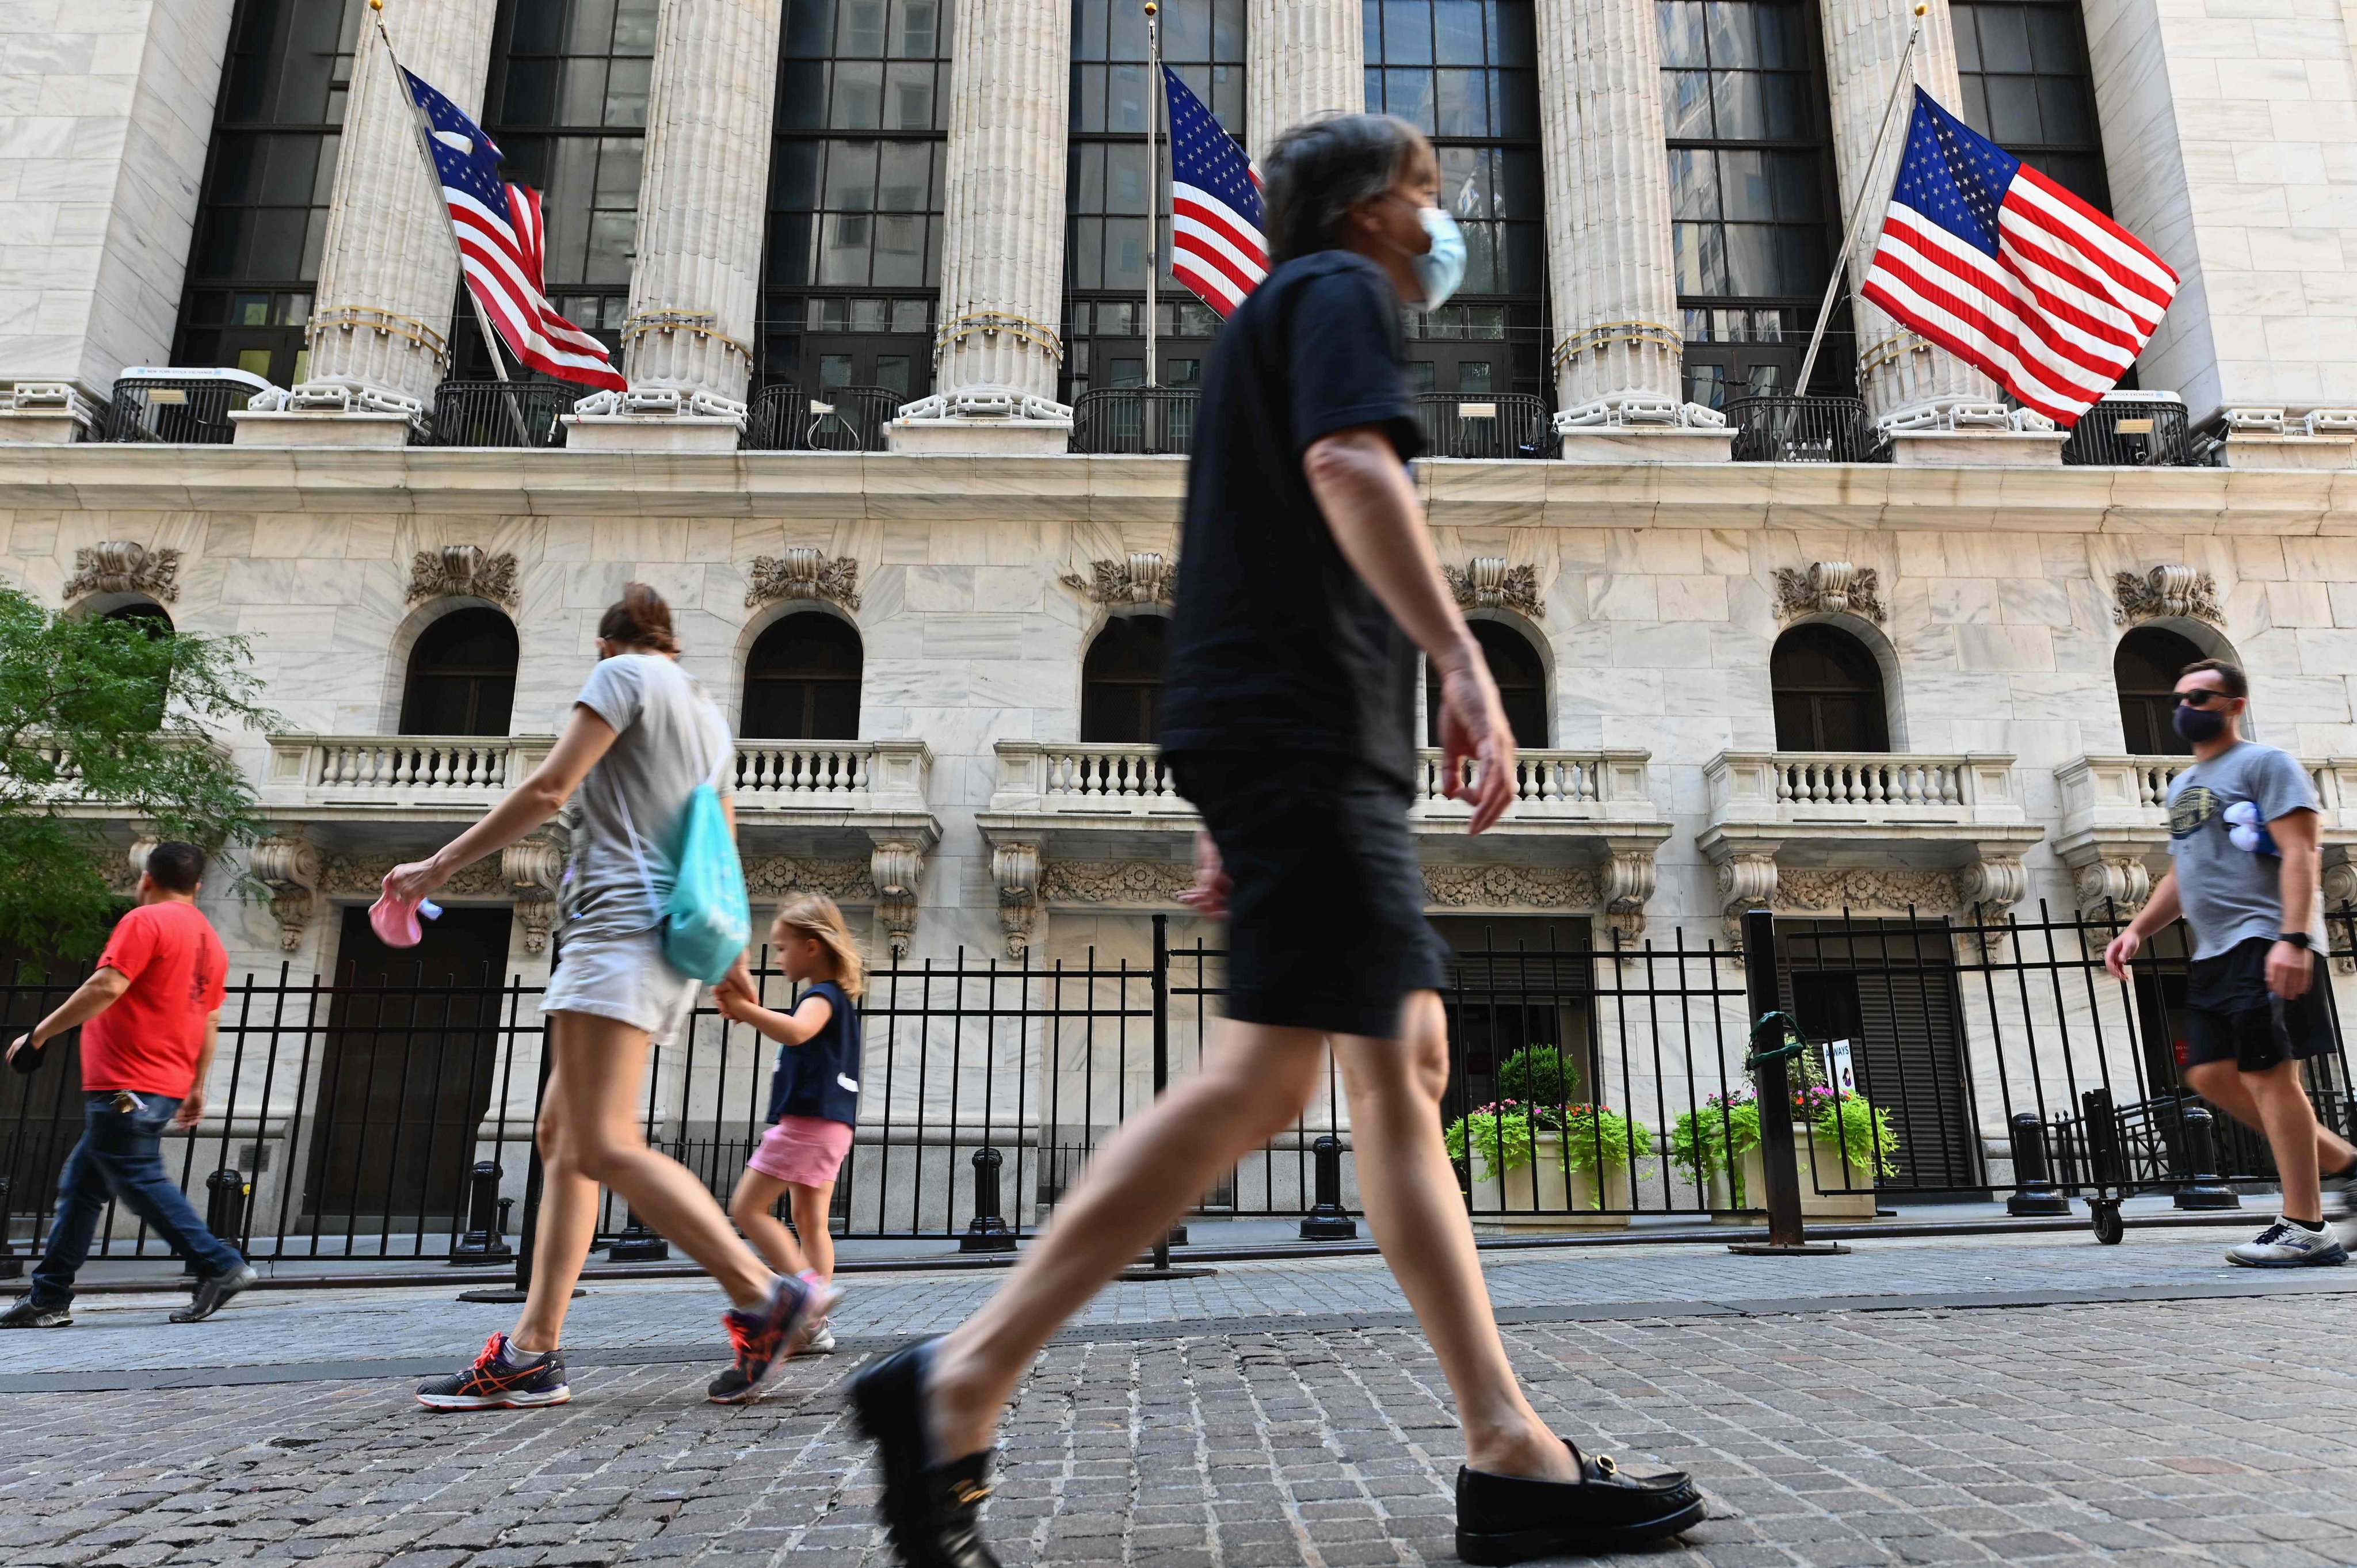 People pass by The New York Stock Exchange (NYSE) at Wall Street in New York City in August 2020. Photo: AFP